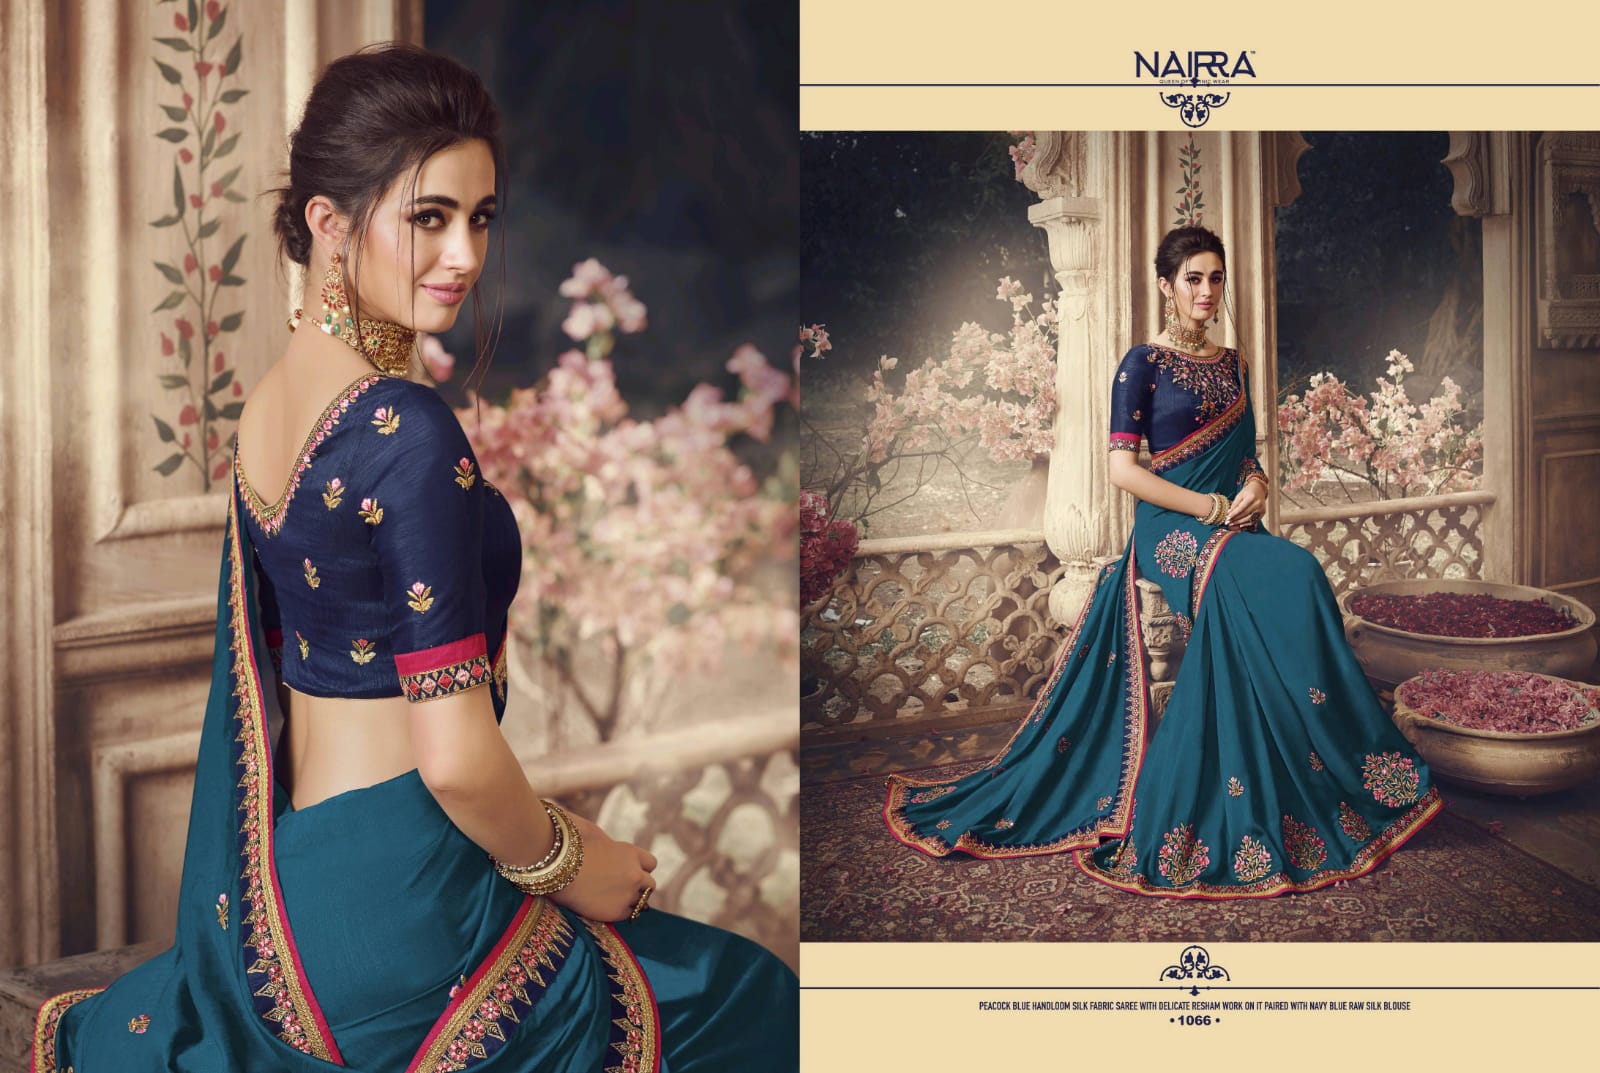 Kathika By Nakkashi Fancy Designer Wedding And Party Wear Saree Looking Pretty Collection At Wholesale